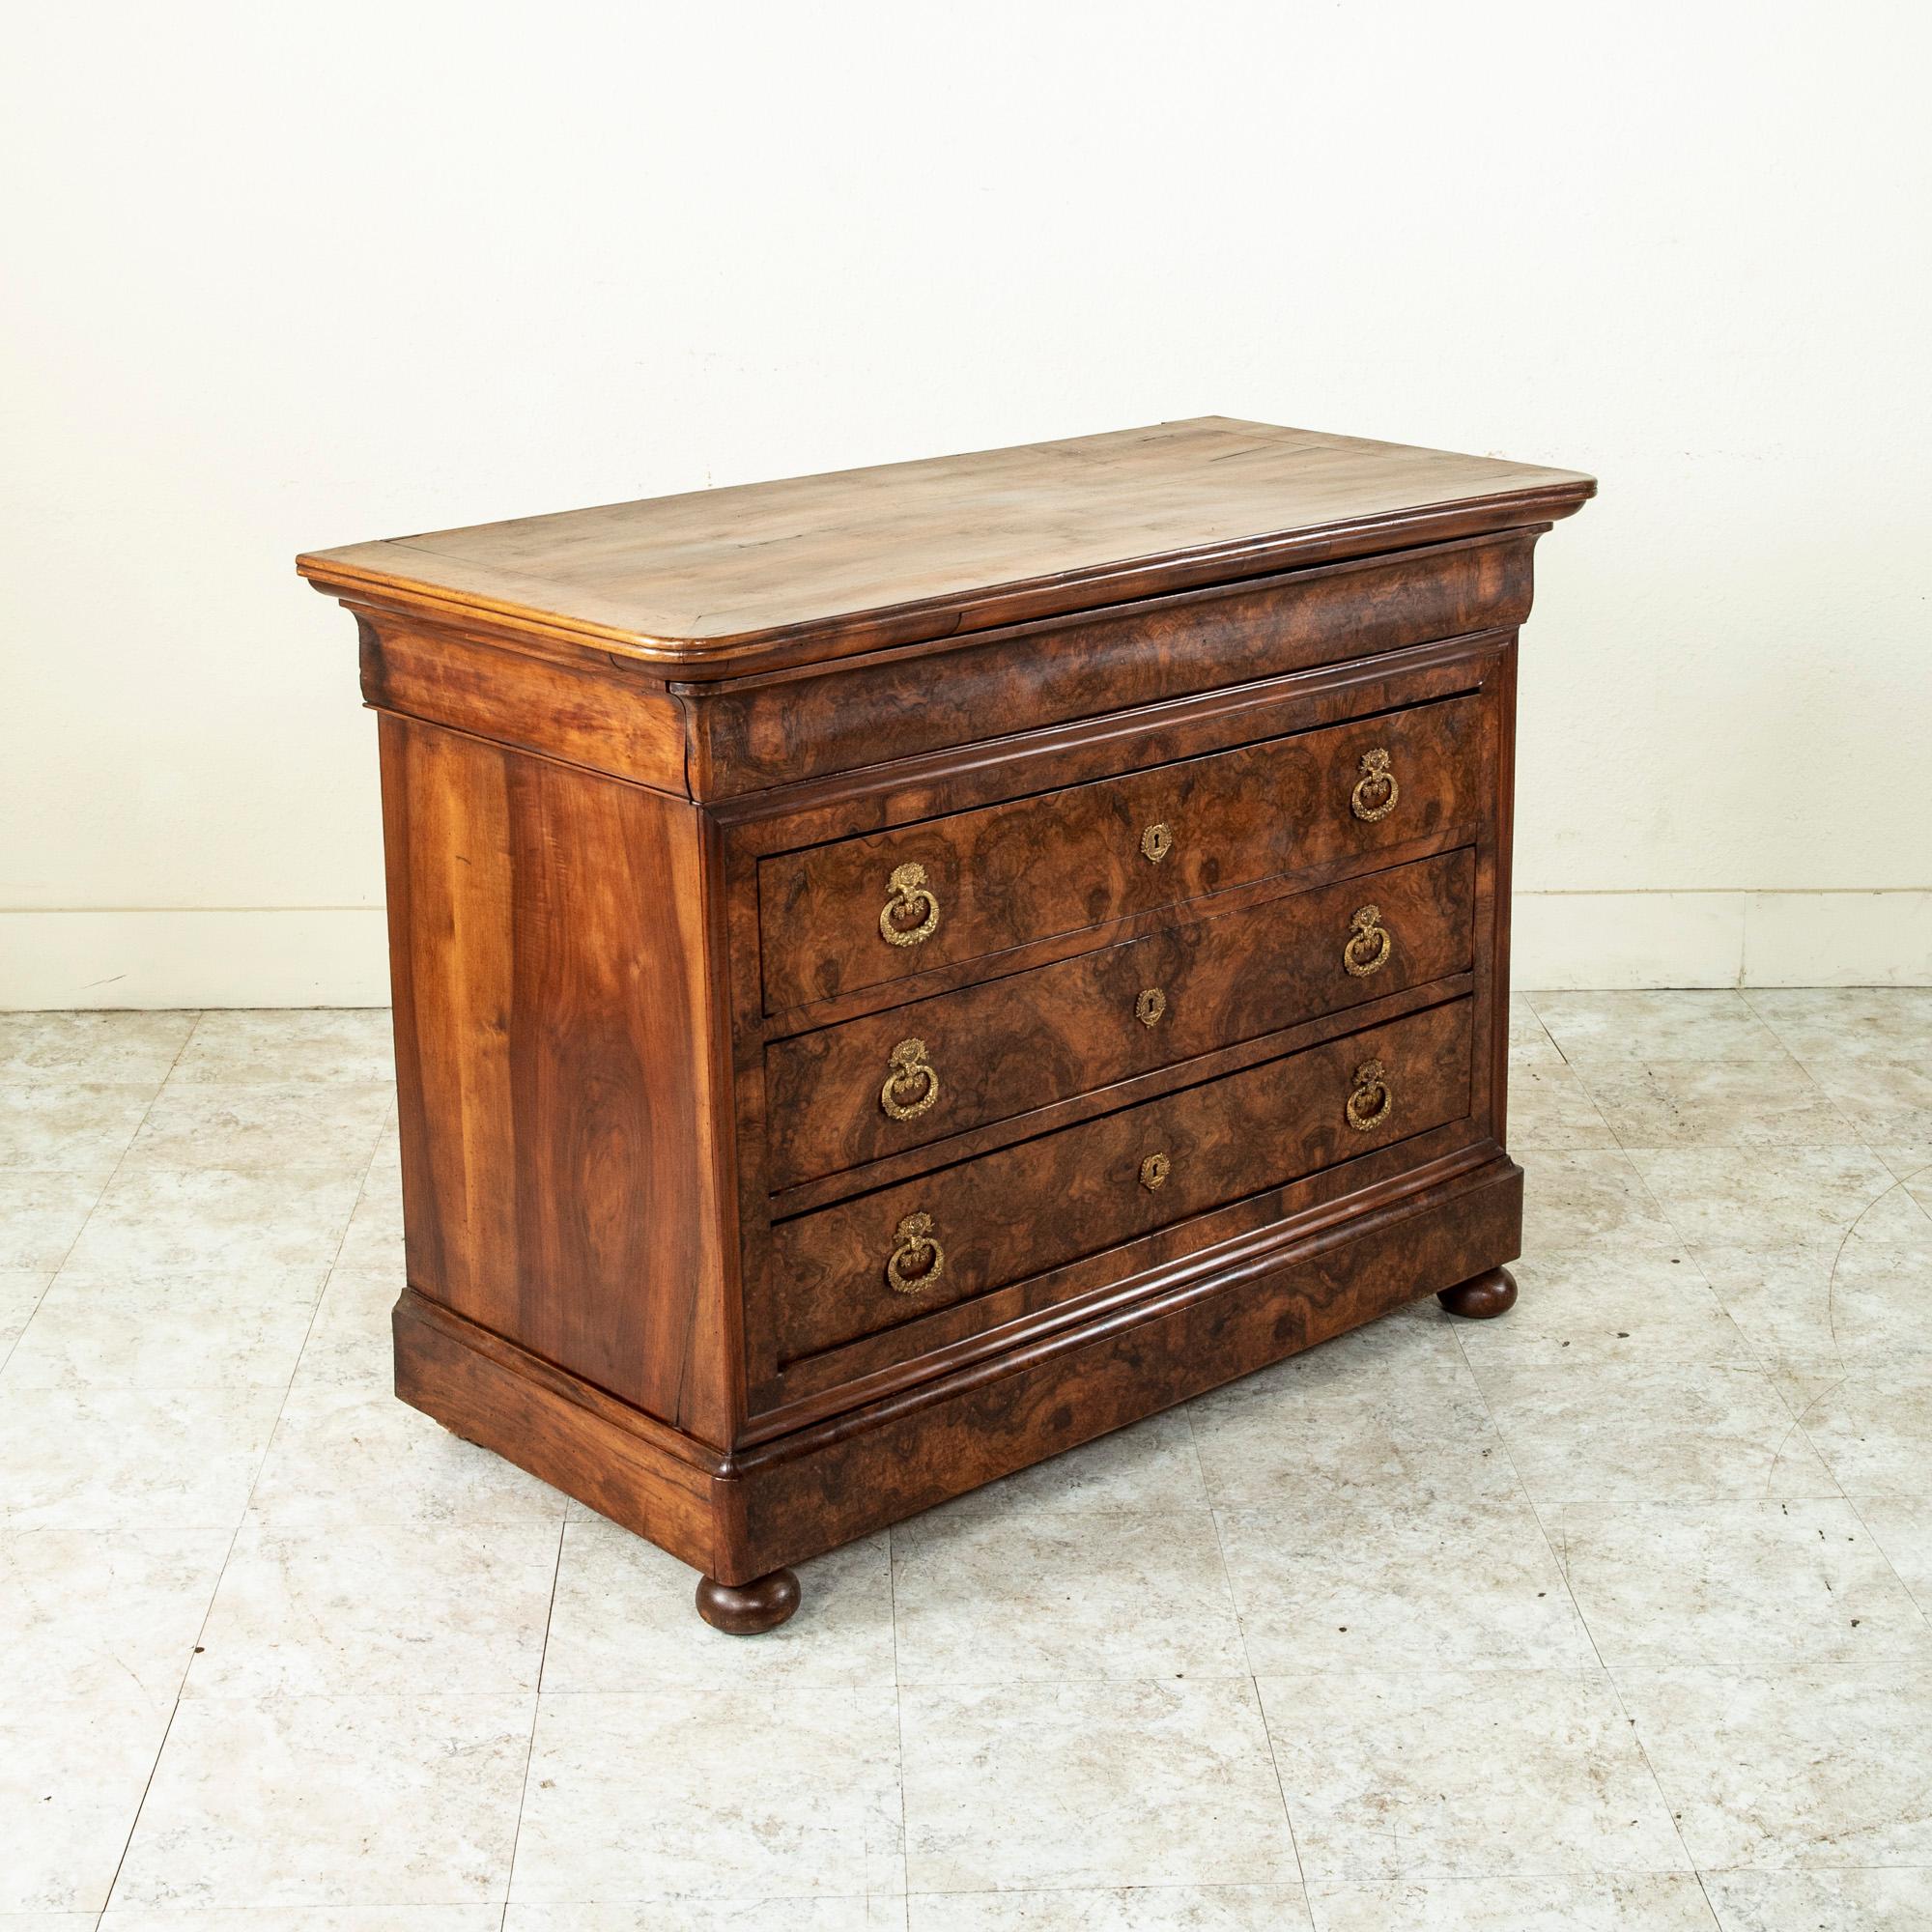 Mid-19th Century French Restauration Period Burl Walnut Chest of Drawers In Good Condition For Sale In Fayetteville, AR